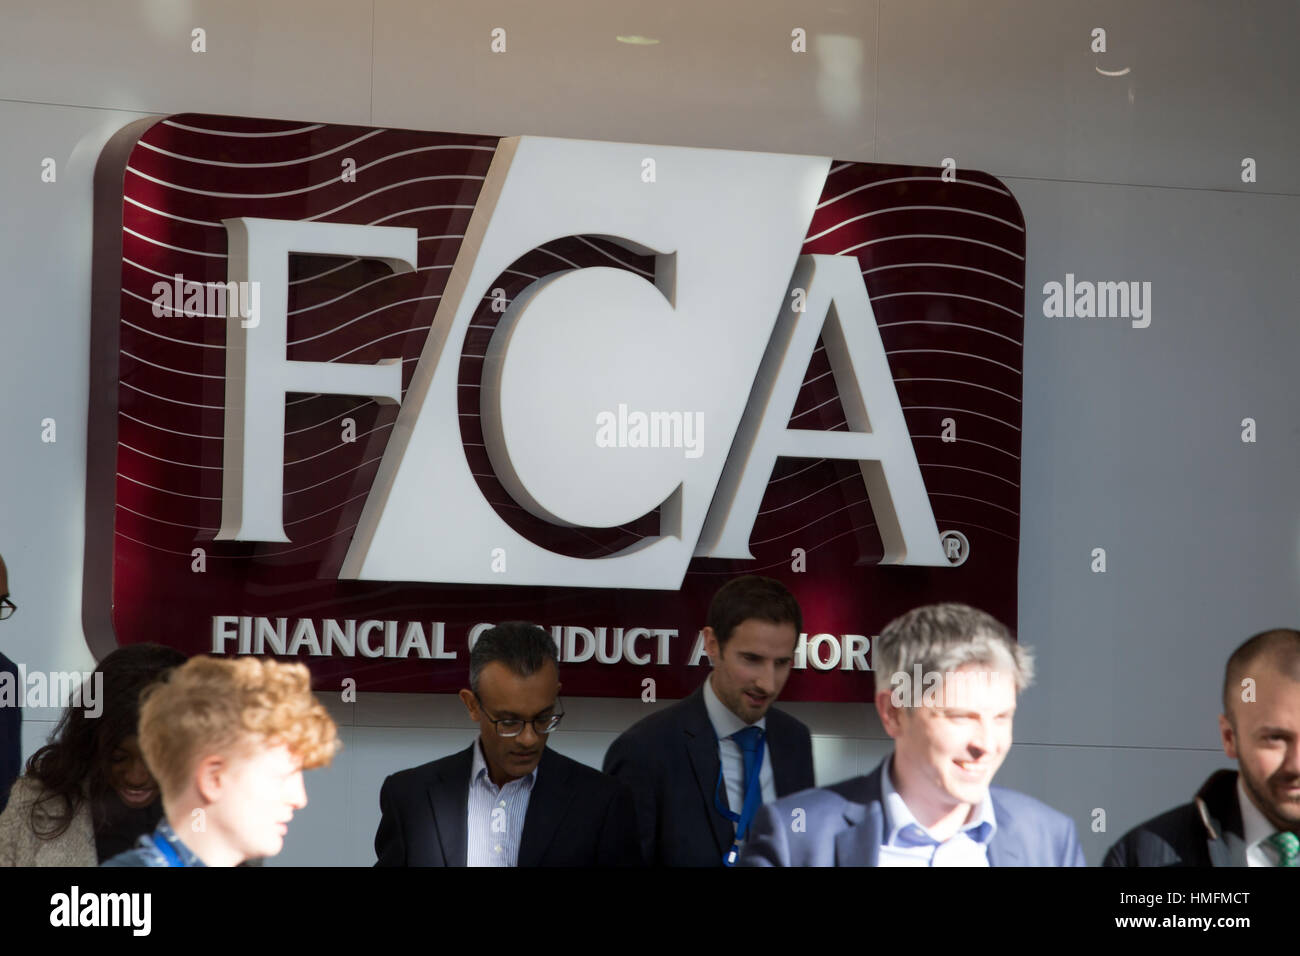 Office entrance to the Financial Conduct Authority (FCA) in London Stock Photo